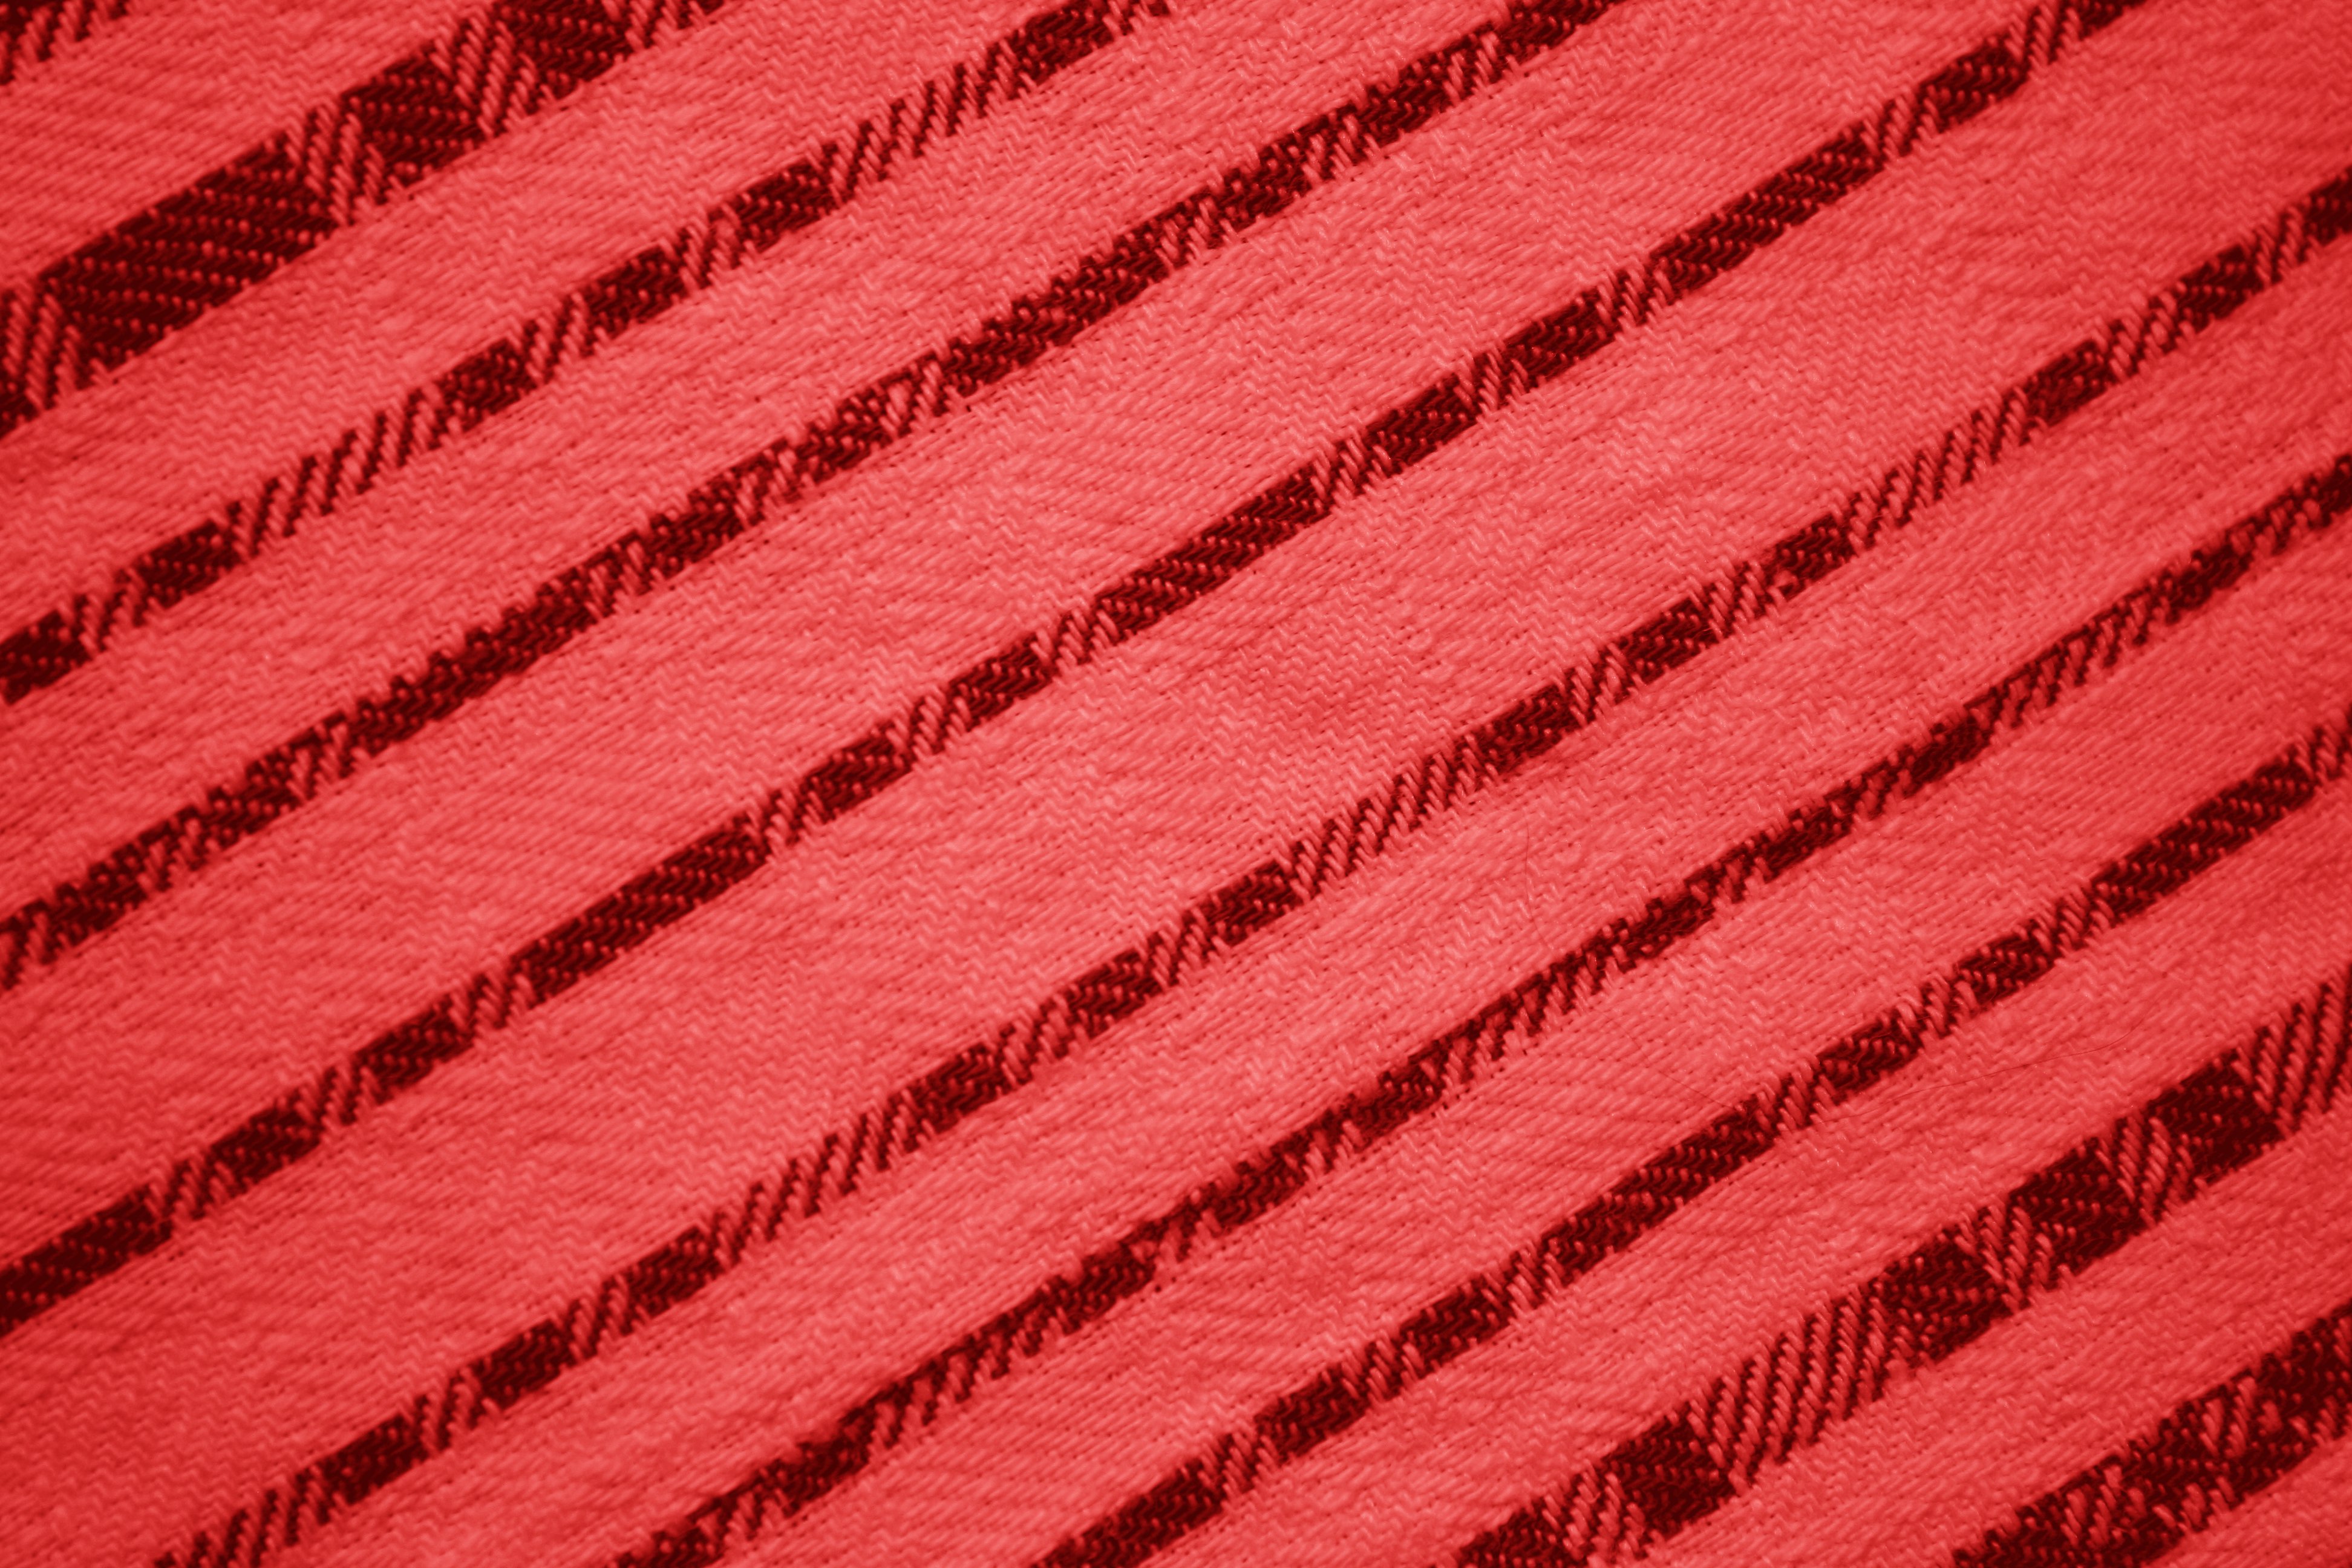 Red Striped Fabric Texture Picture Free Photograph Photos Public Domain ...